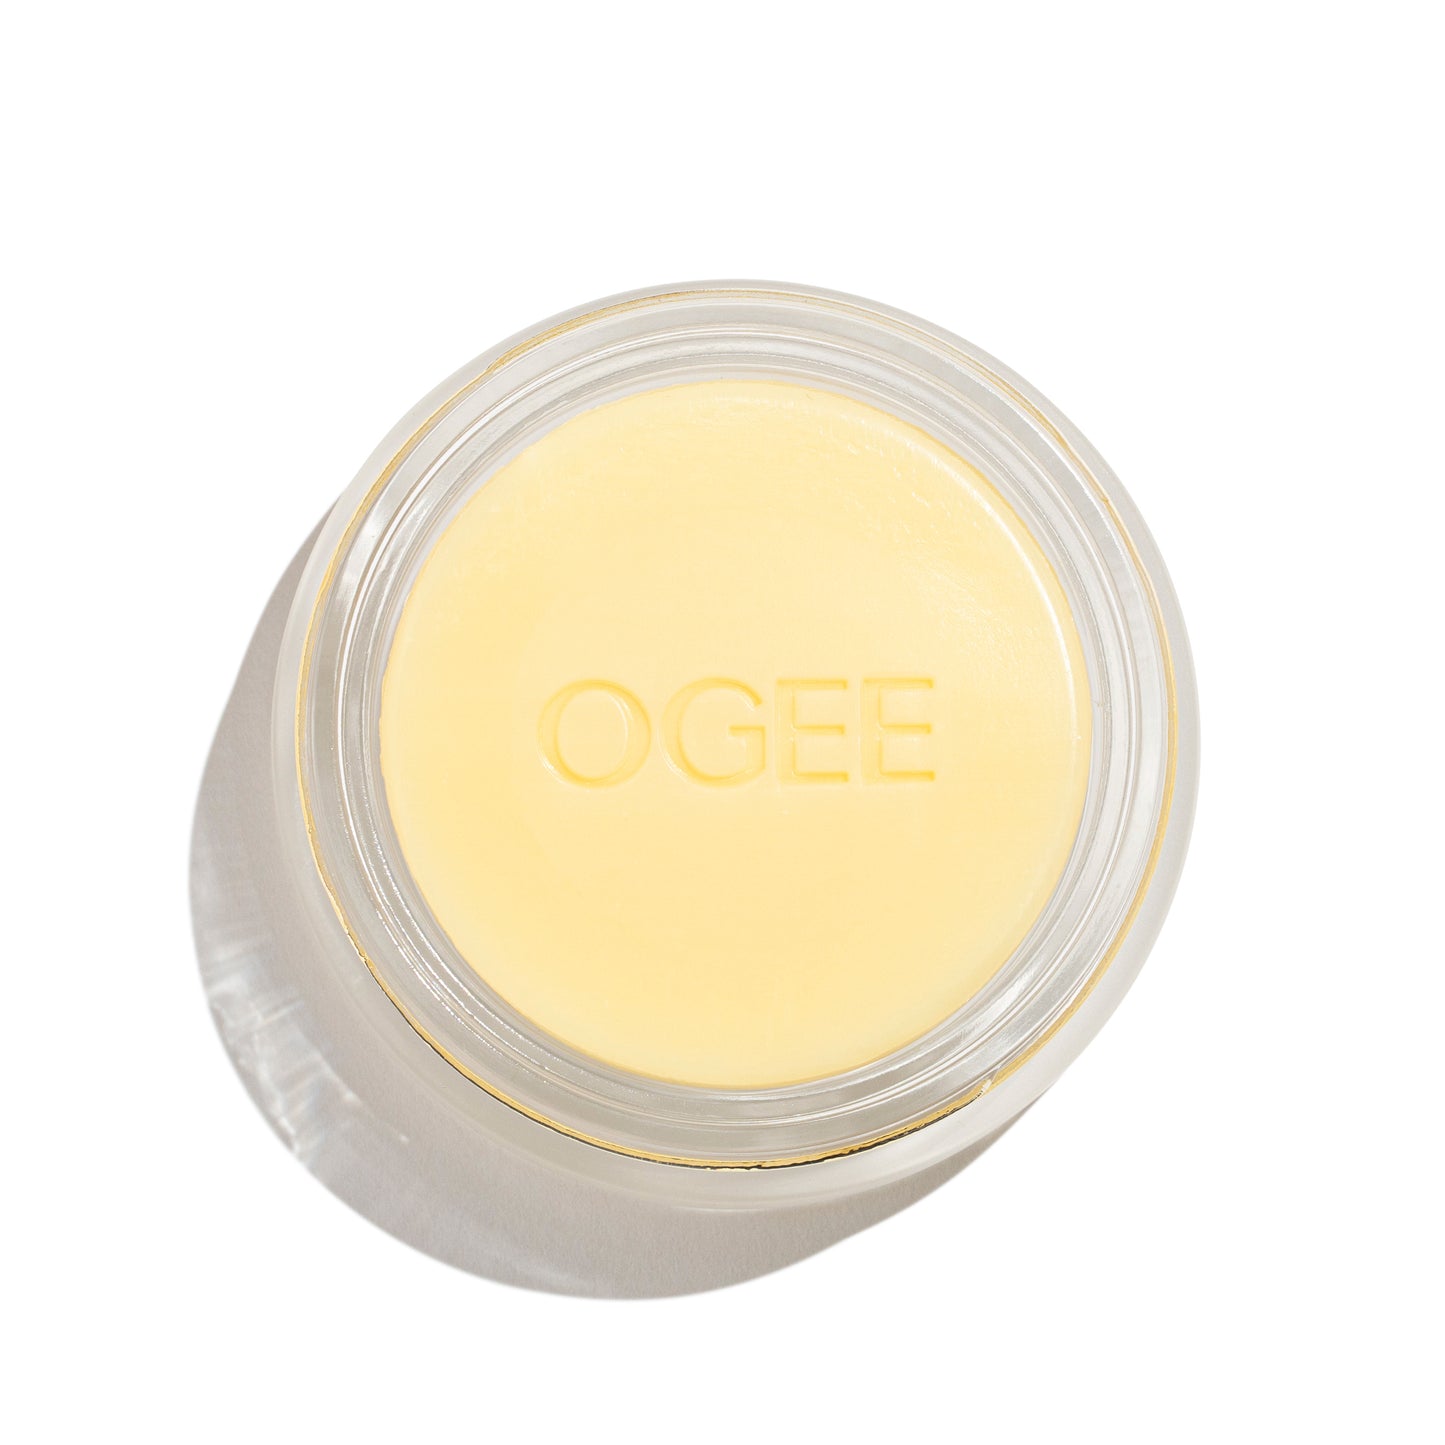 The Brush Cleaner by Ogee. A powerful cleansing soap that effectively removes makeup and buildup without harsh chemicals for a beyond-clean application.